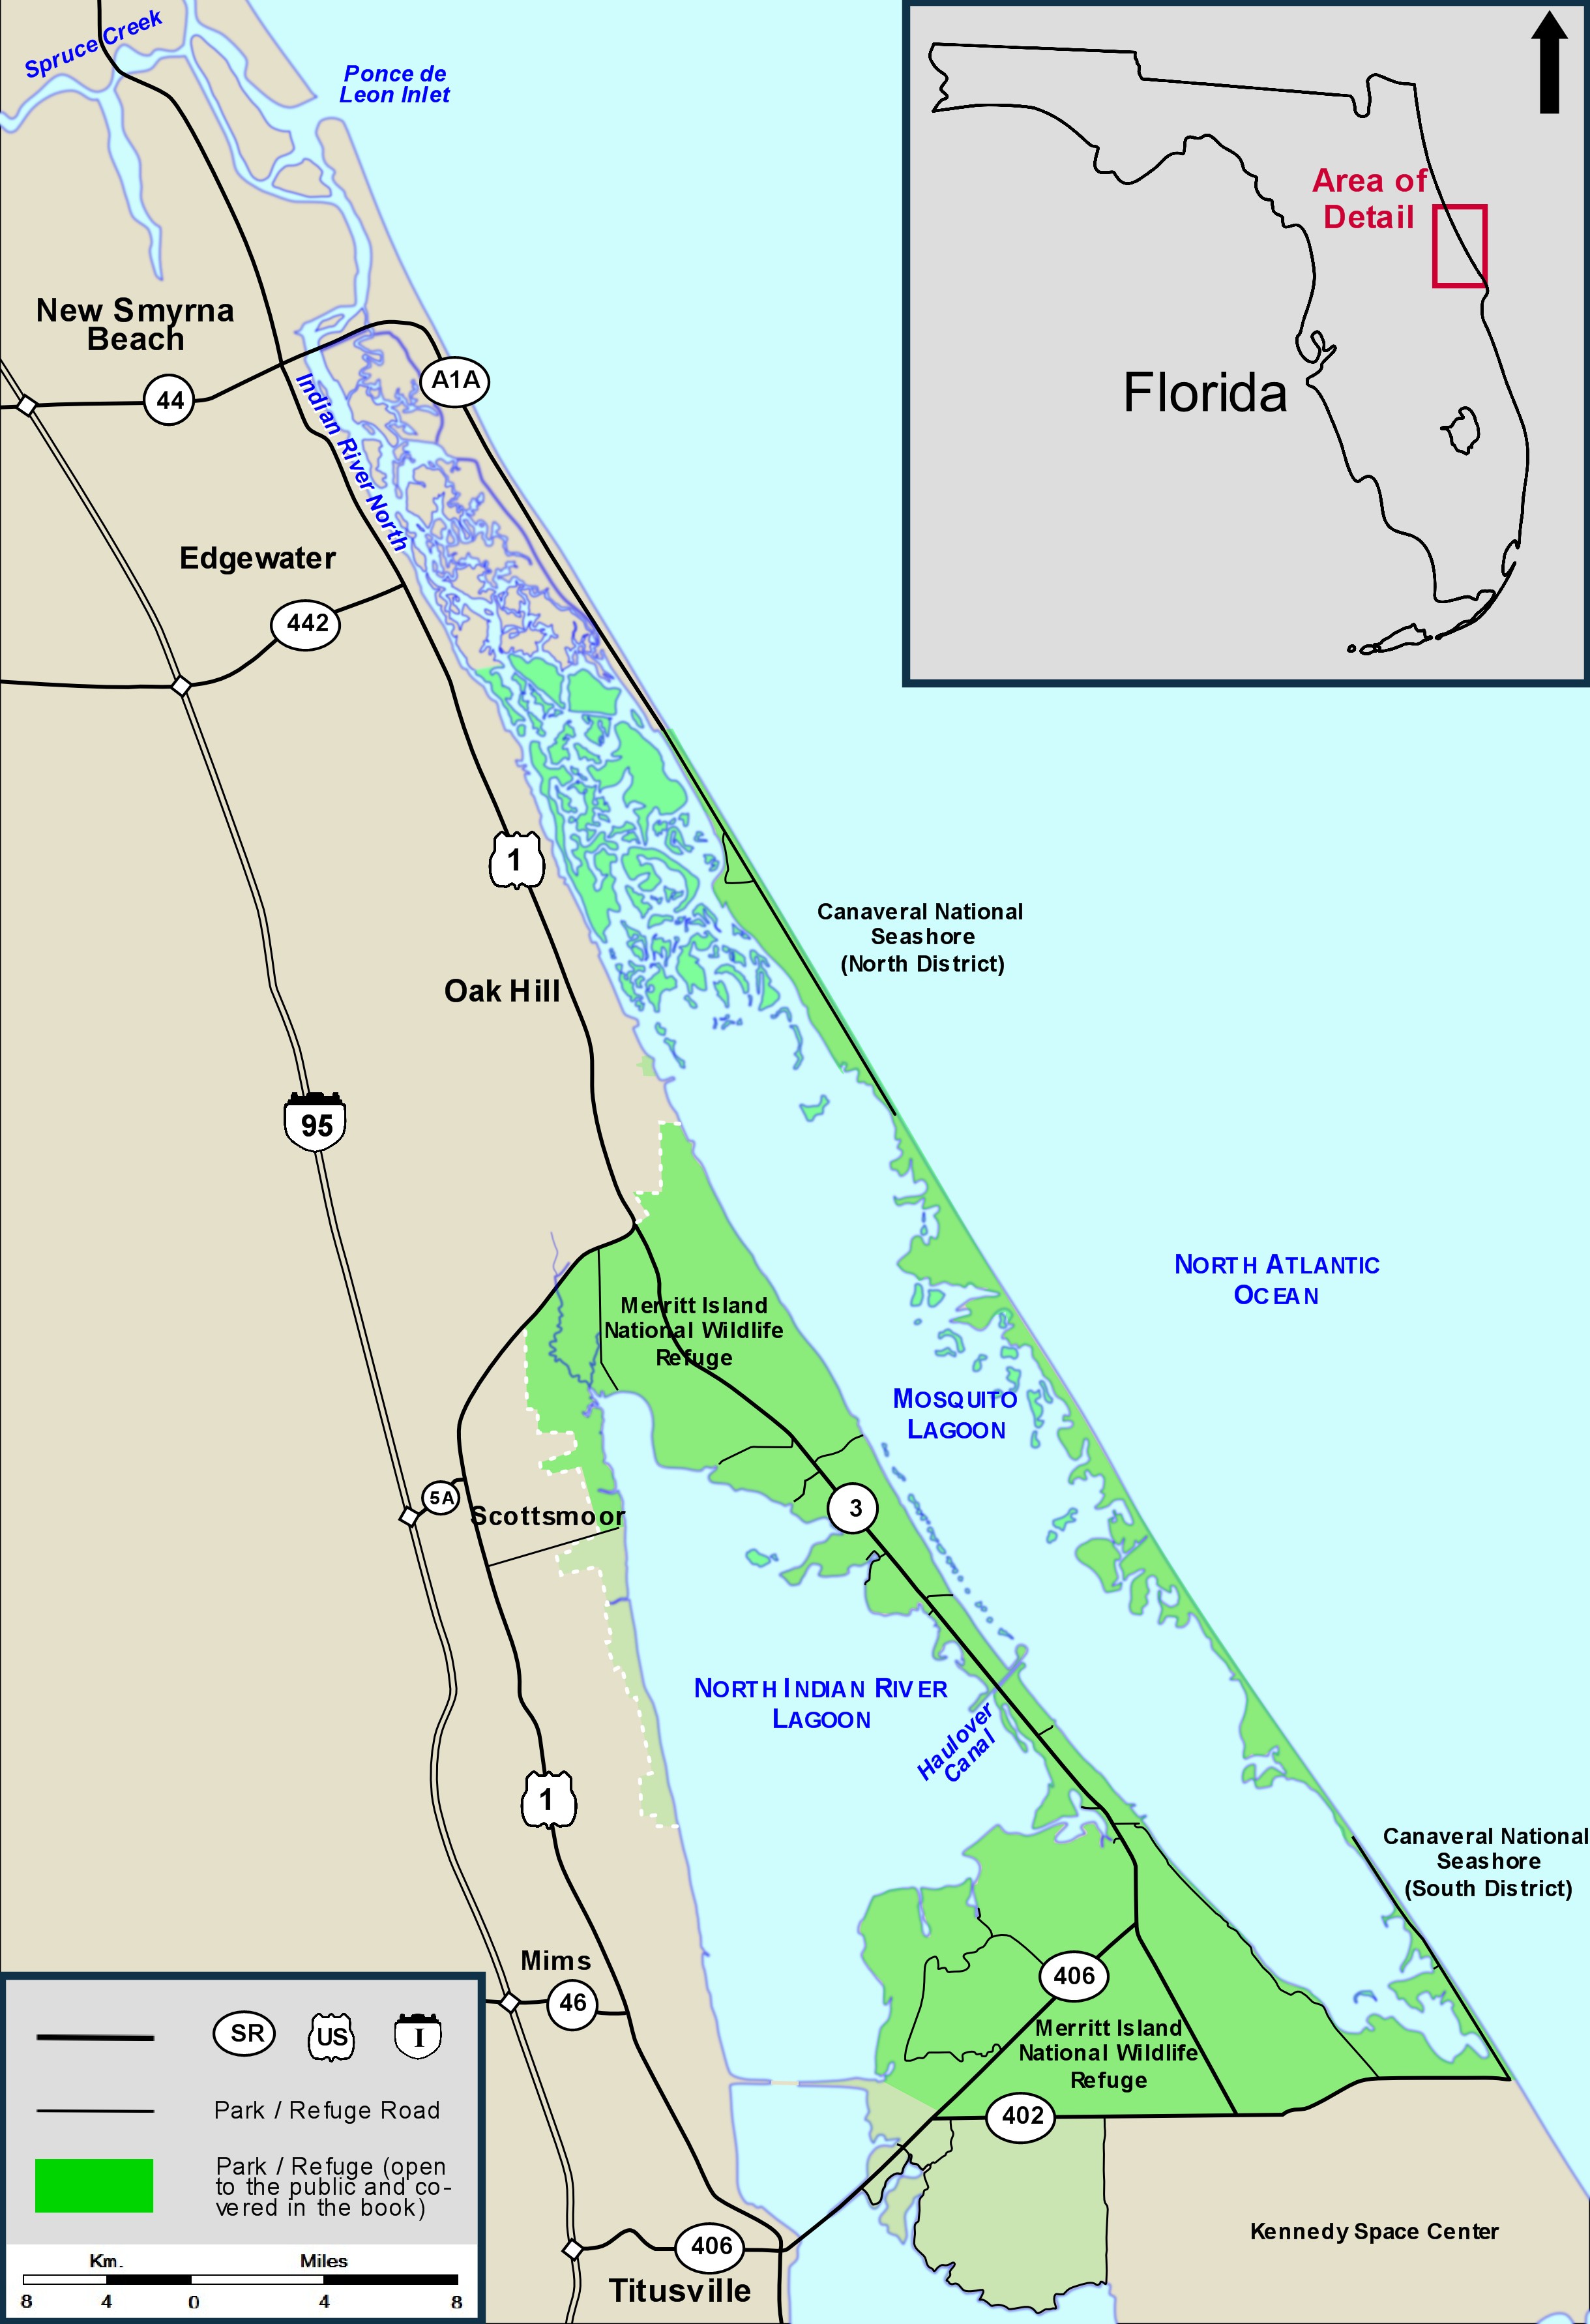 Map of Mosquito Lagoon and North Indian River Lagoon in East Central Florida